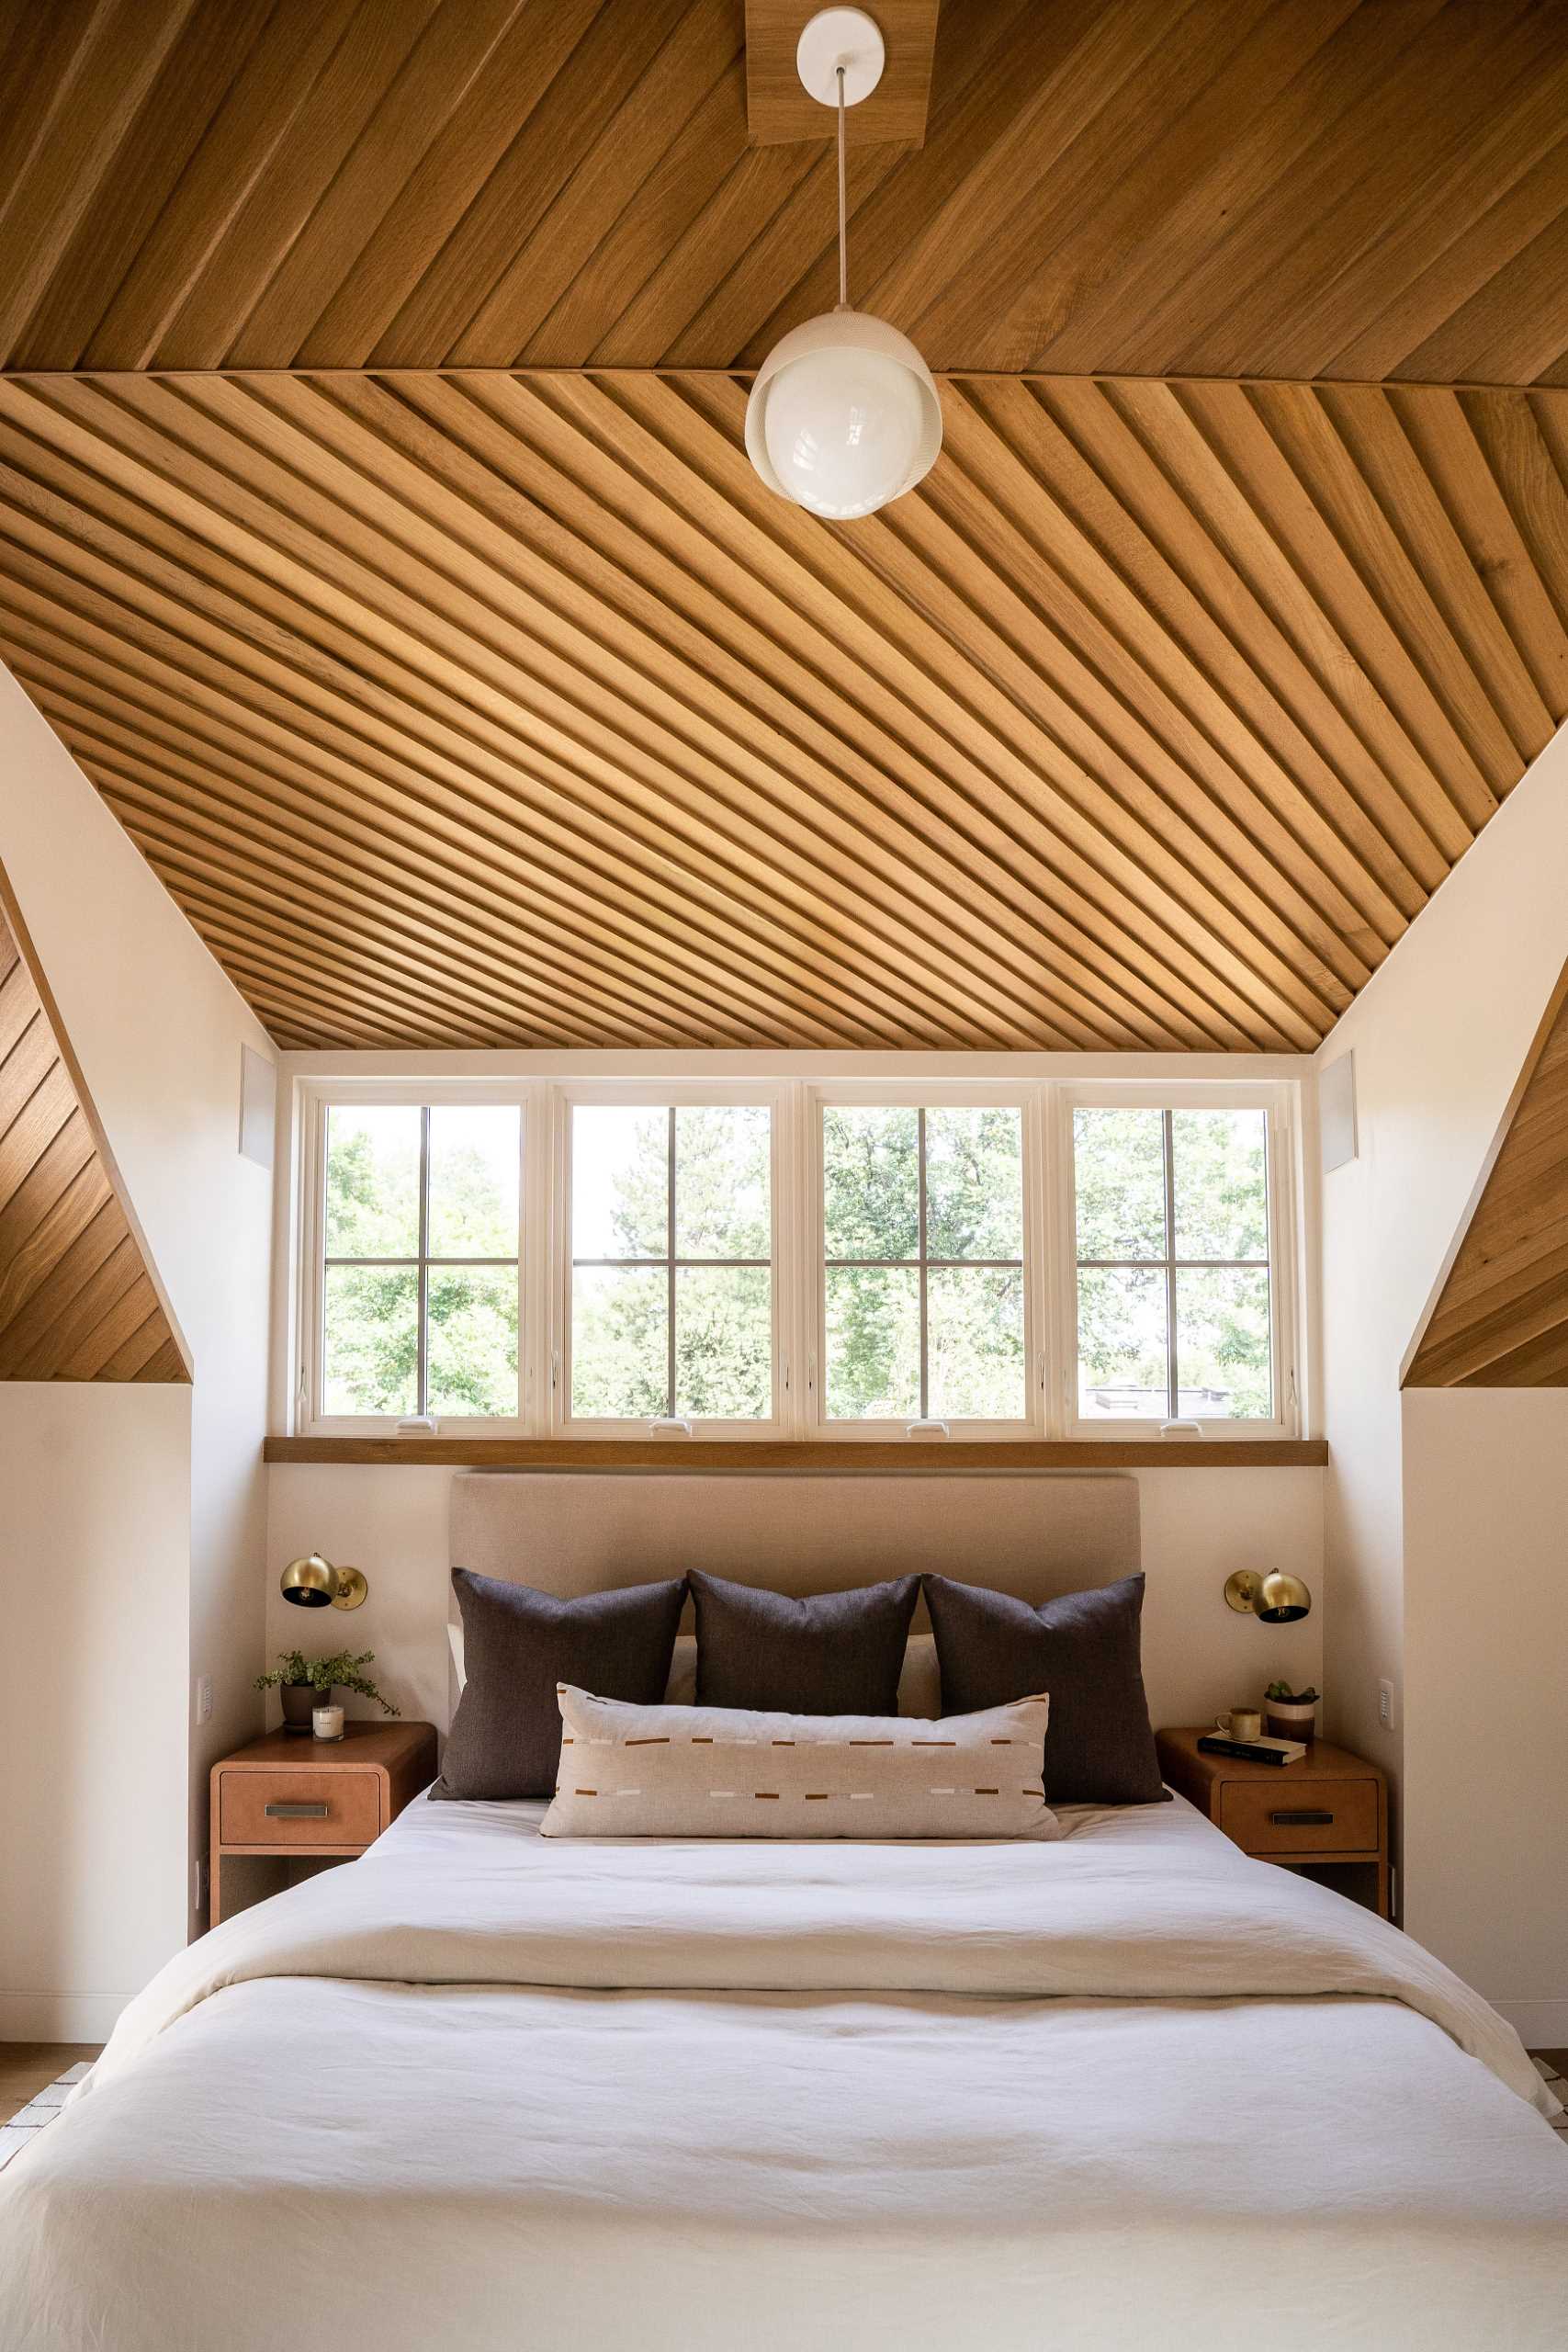 In this main bedroom, the ceiling is composed of lap siding installed at an angle, aligned perfectly at the ridge, while built-in dressers make smart use of the available ،e.